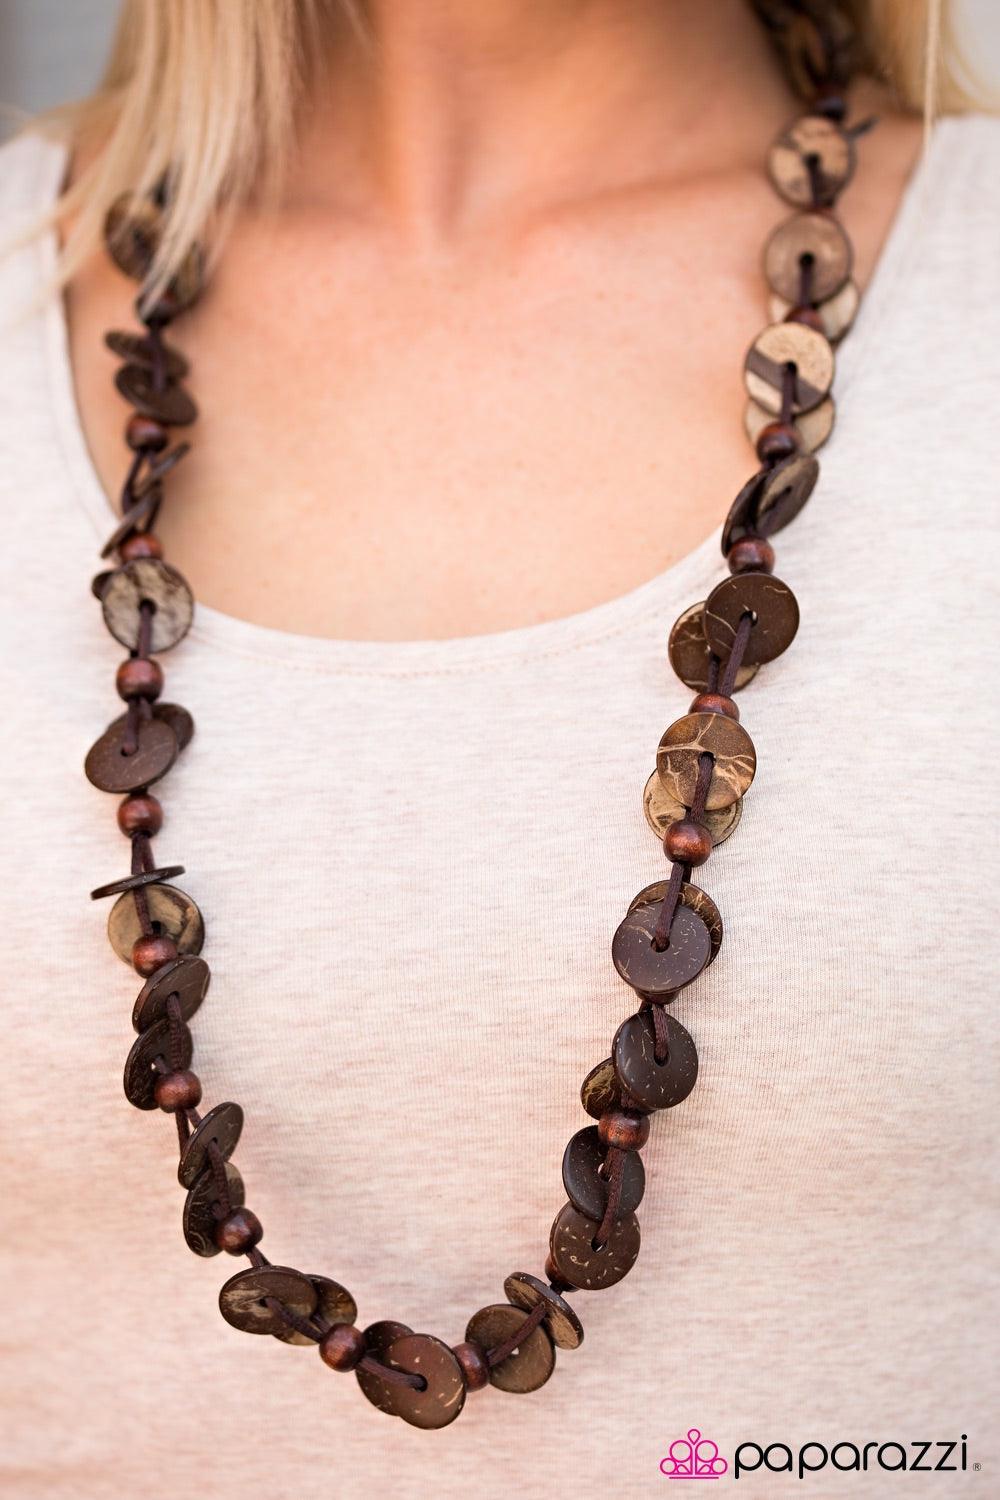 Paparazzi Accessories Caribbean Carnival - Brown Shiny wooden discs brushed in a brown finish trickle along shiny brown cording, creating two knotted layers. Brown wooden beads alternate along the earthy discs, adding an earthy flair to the summery palett